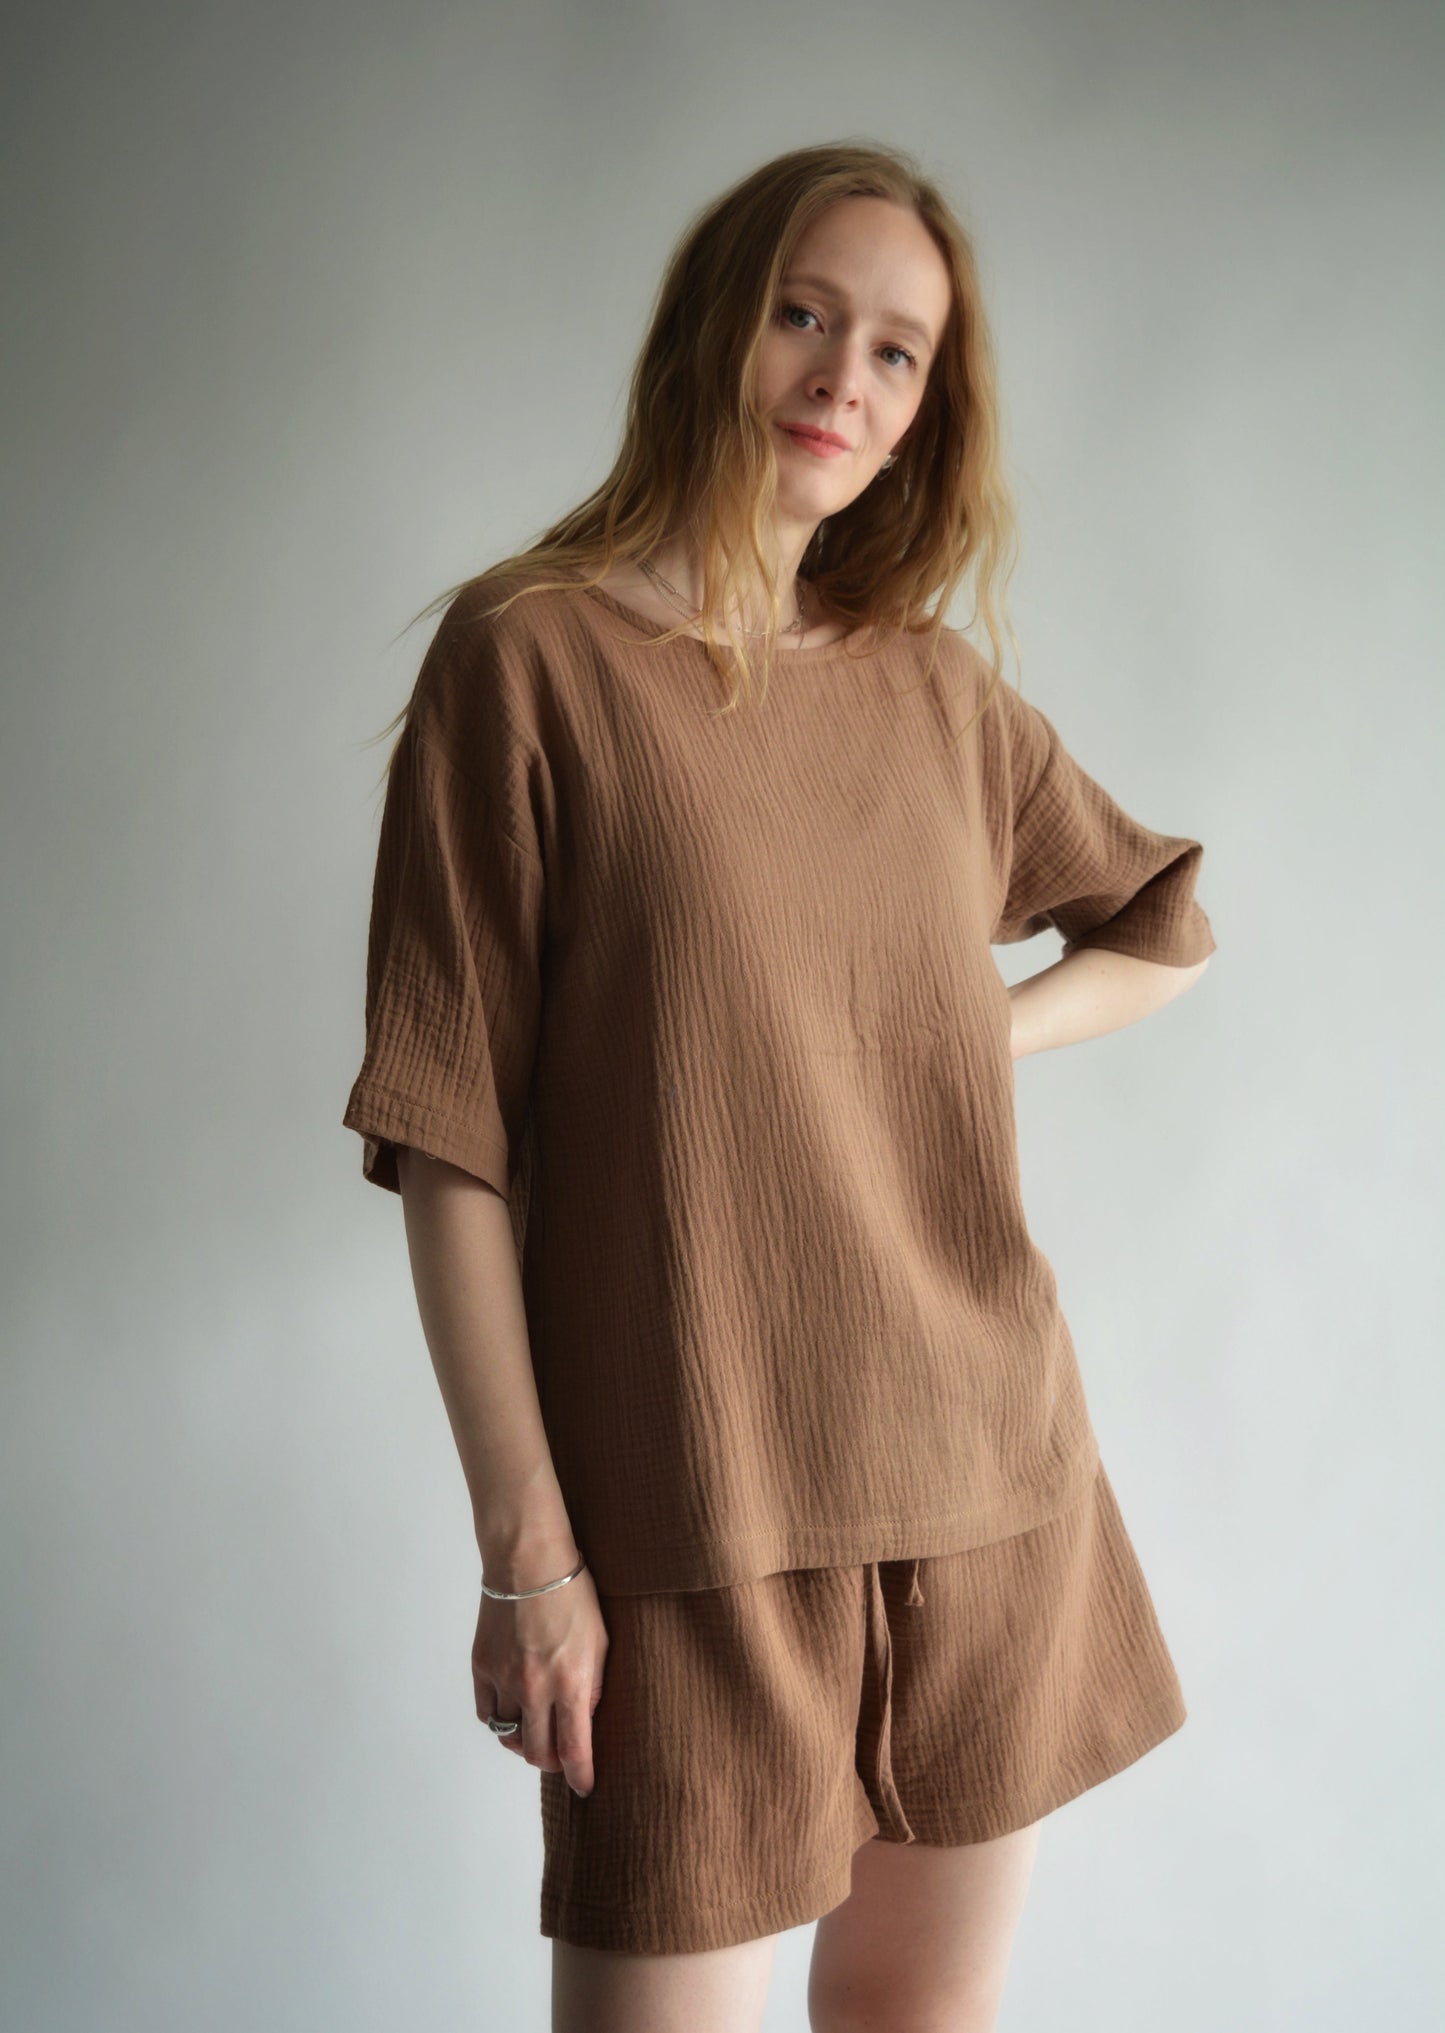 Muslin Two-Piece Set: Cotton T-Shirt and Shorts in Chestnut Elegance